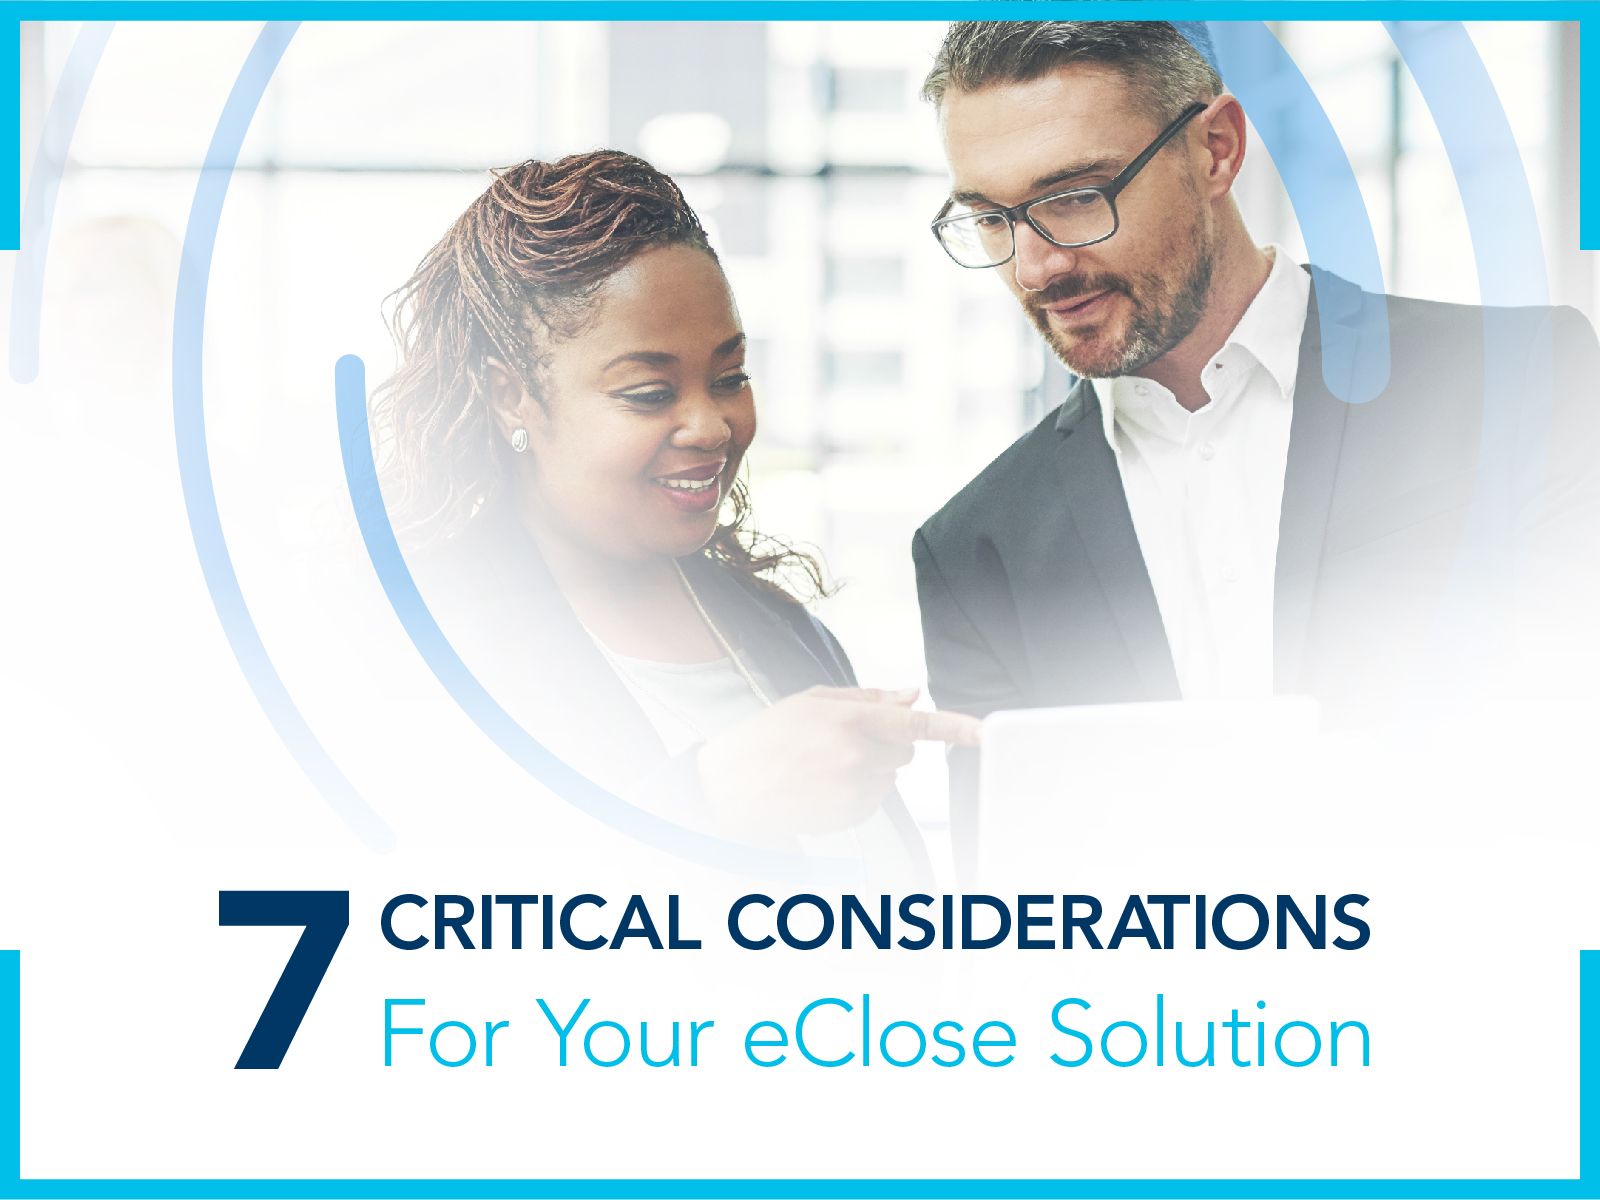 7 critical considerations for your eClose solution